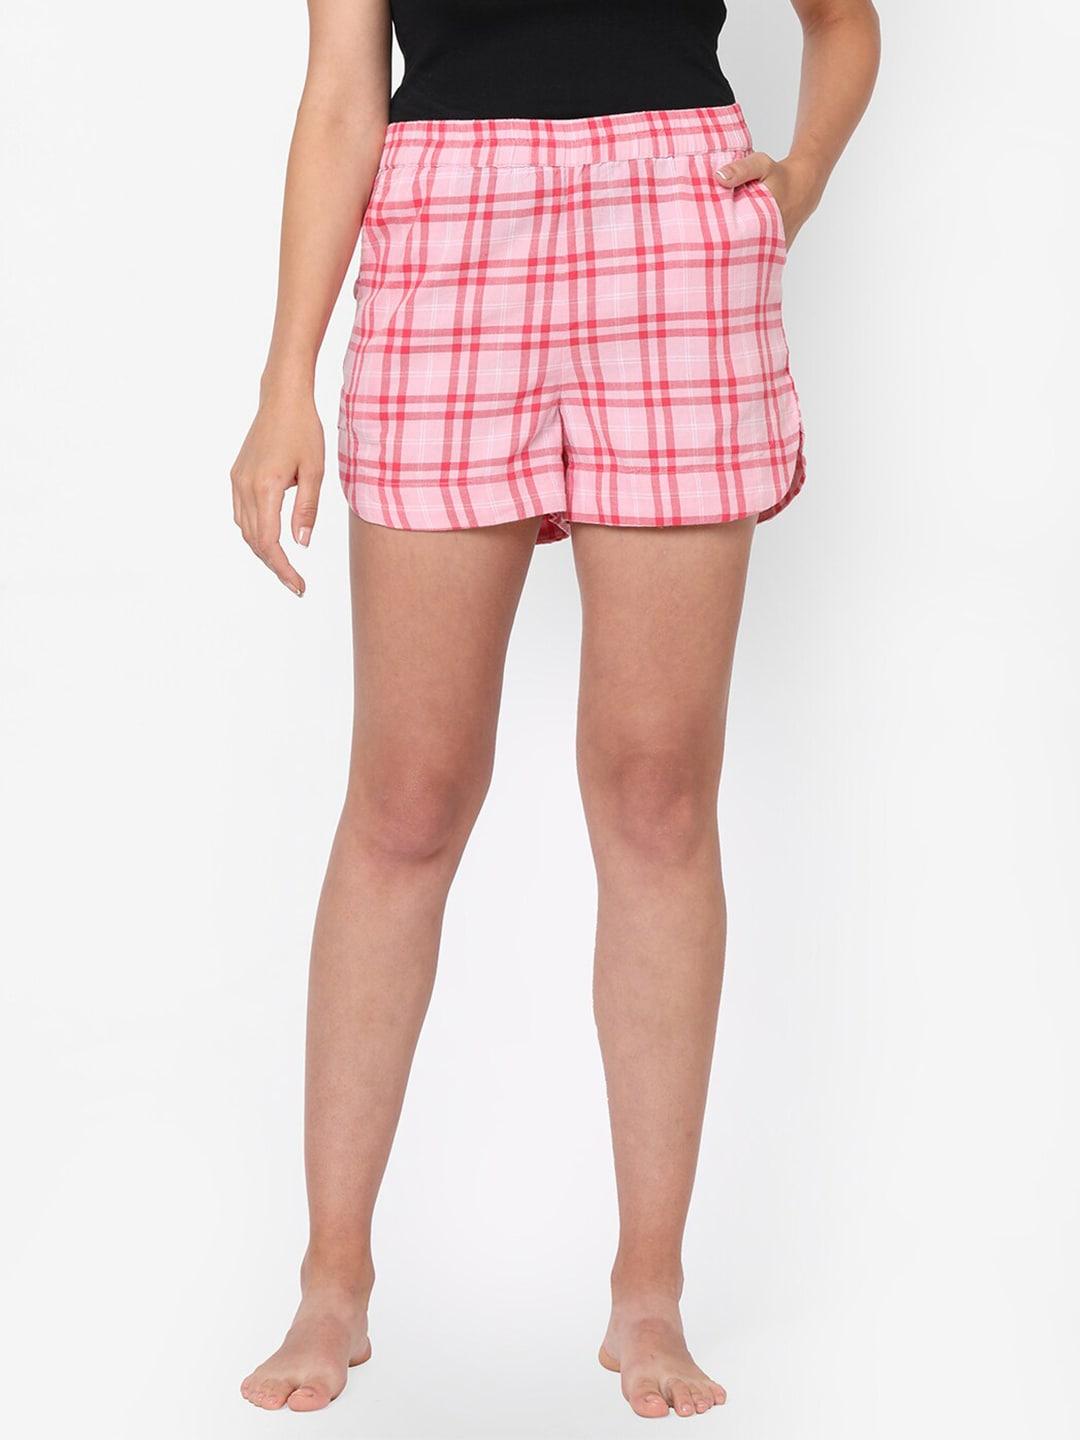 Mystere Paris Women Pink & White Checked Lounge Shorts